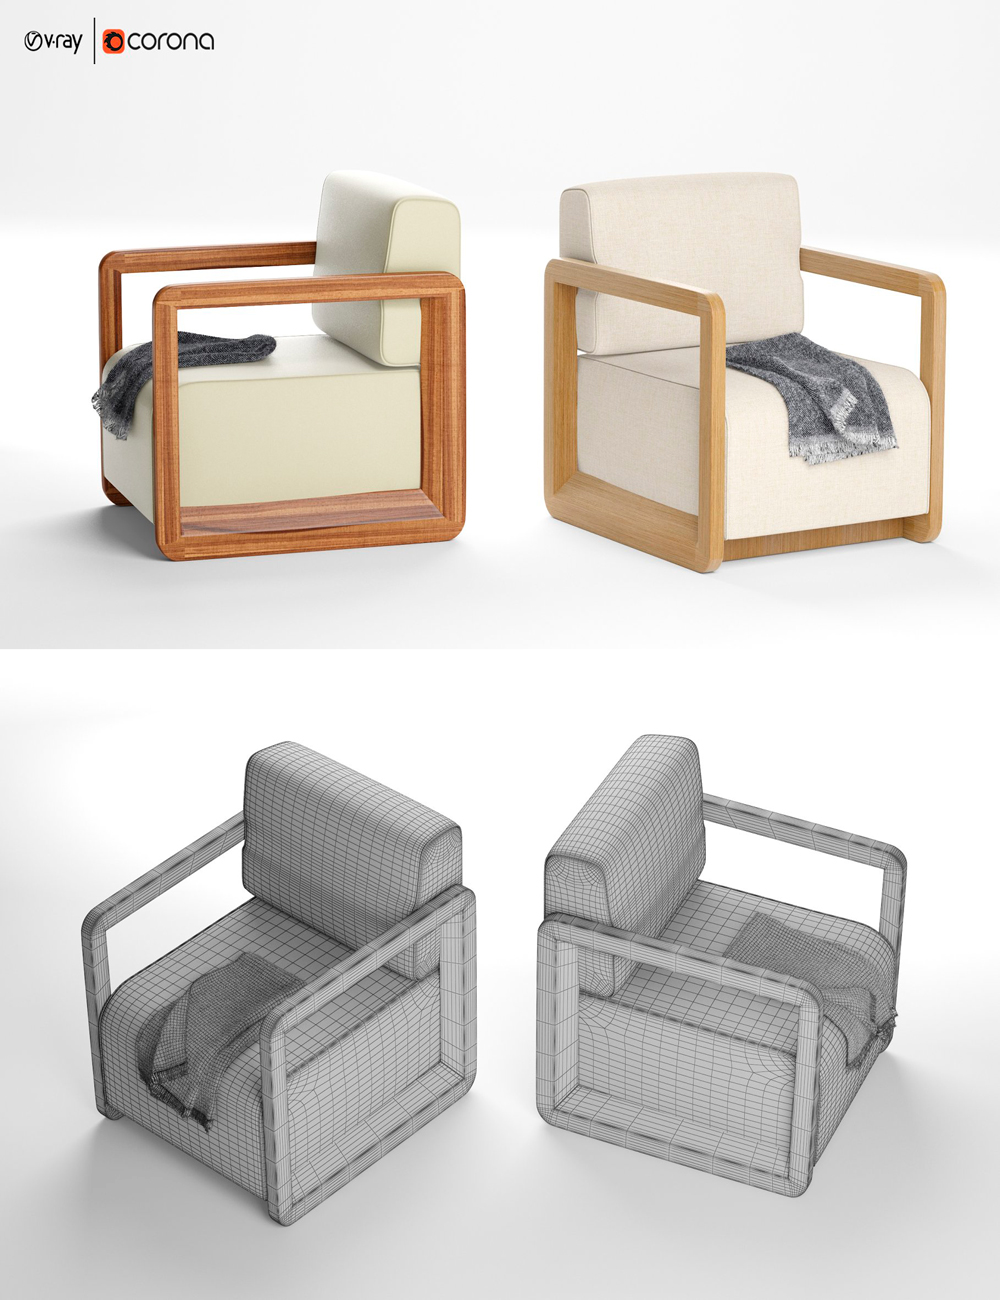 Rendering an amazing 3d model of an upholstered armchair